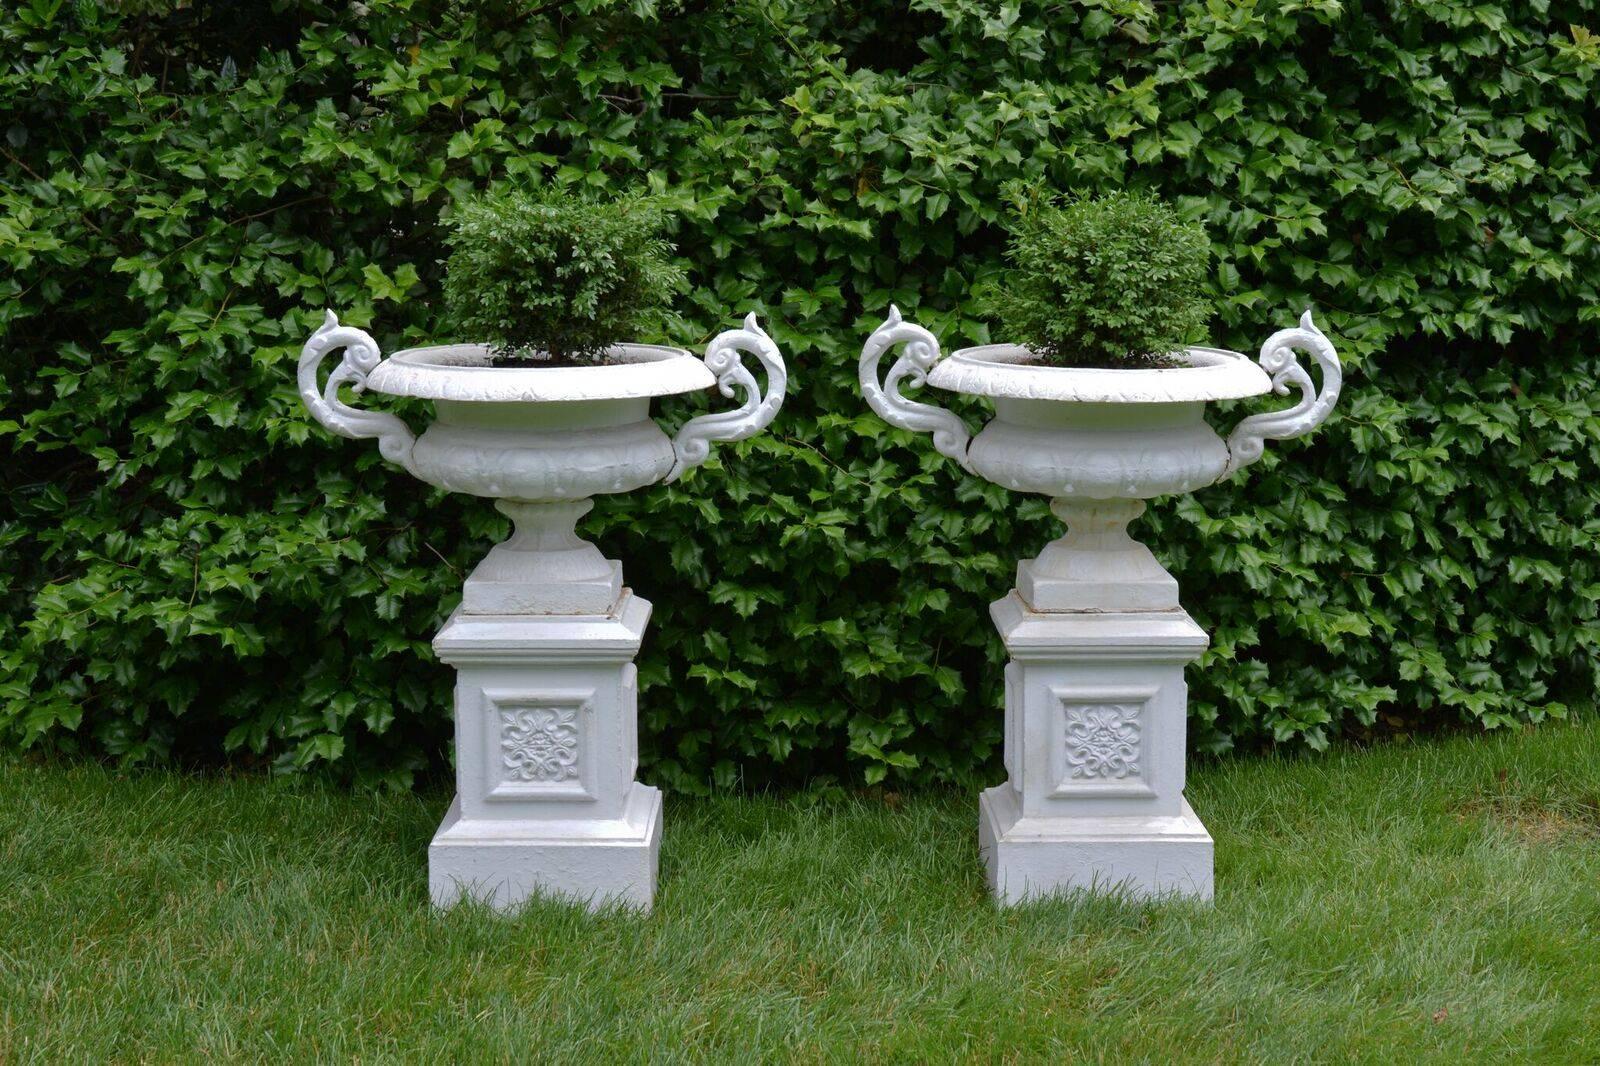 A pair of cast-iron tazza form urns with scrolled handles, the body of the urns semi-lobed and on rising socles with egg and dart motif, on integral square bases, the urns atop cast-iron pedestals, the side panels ornamented with stylized botanical